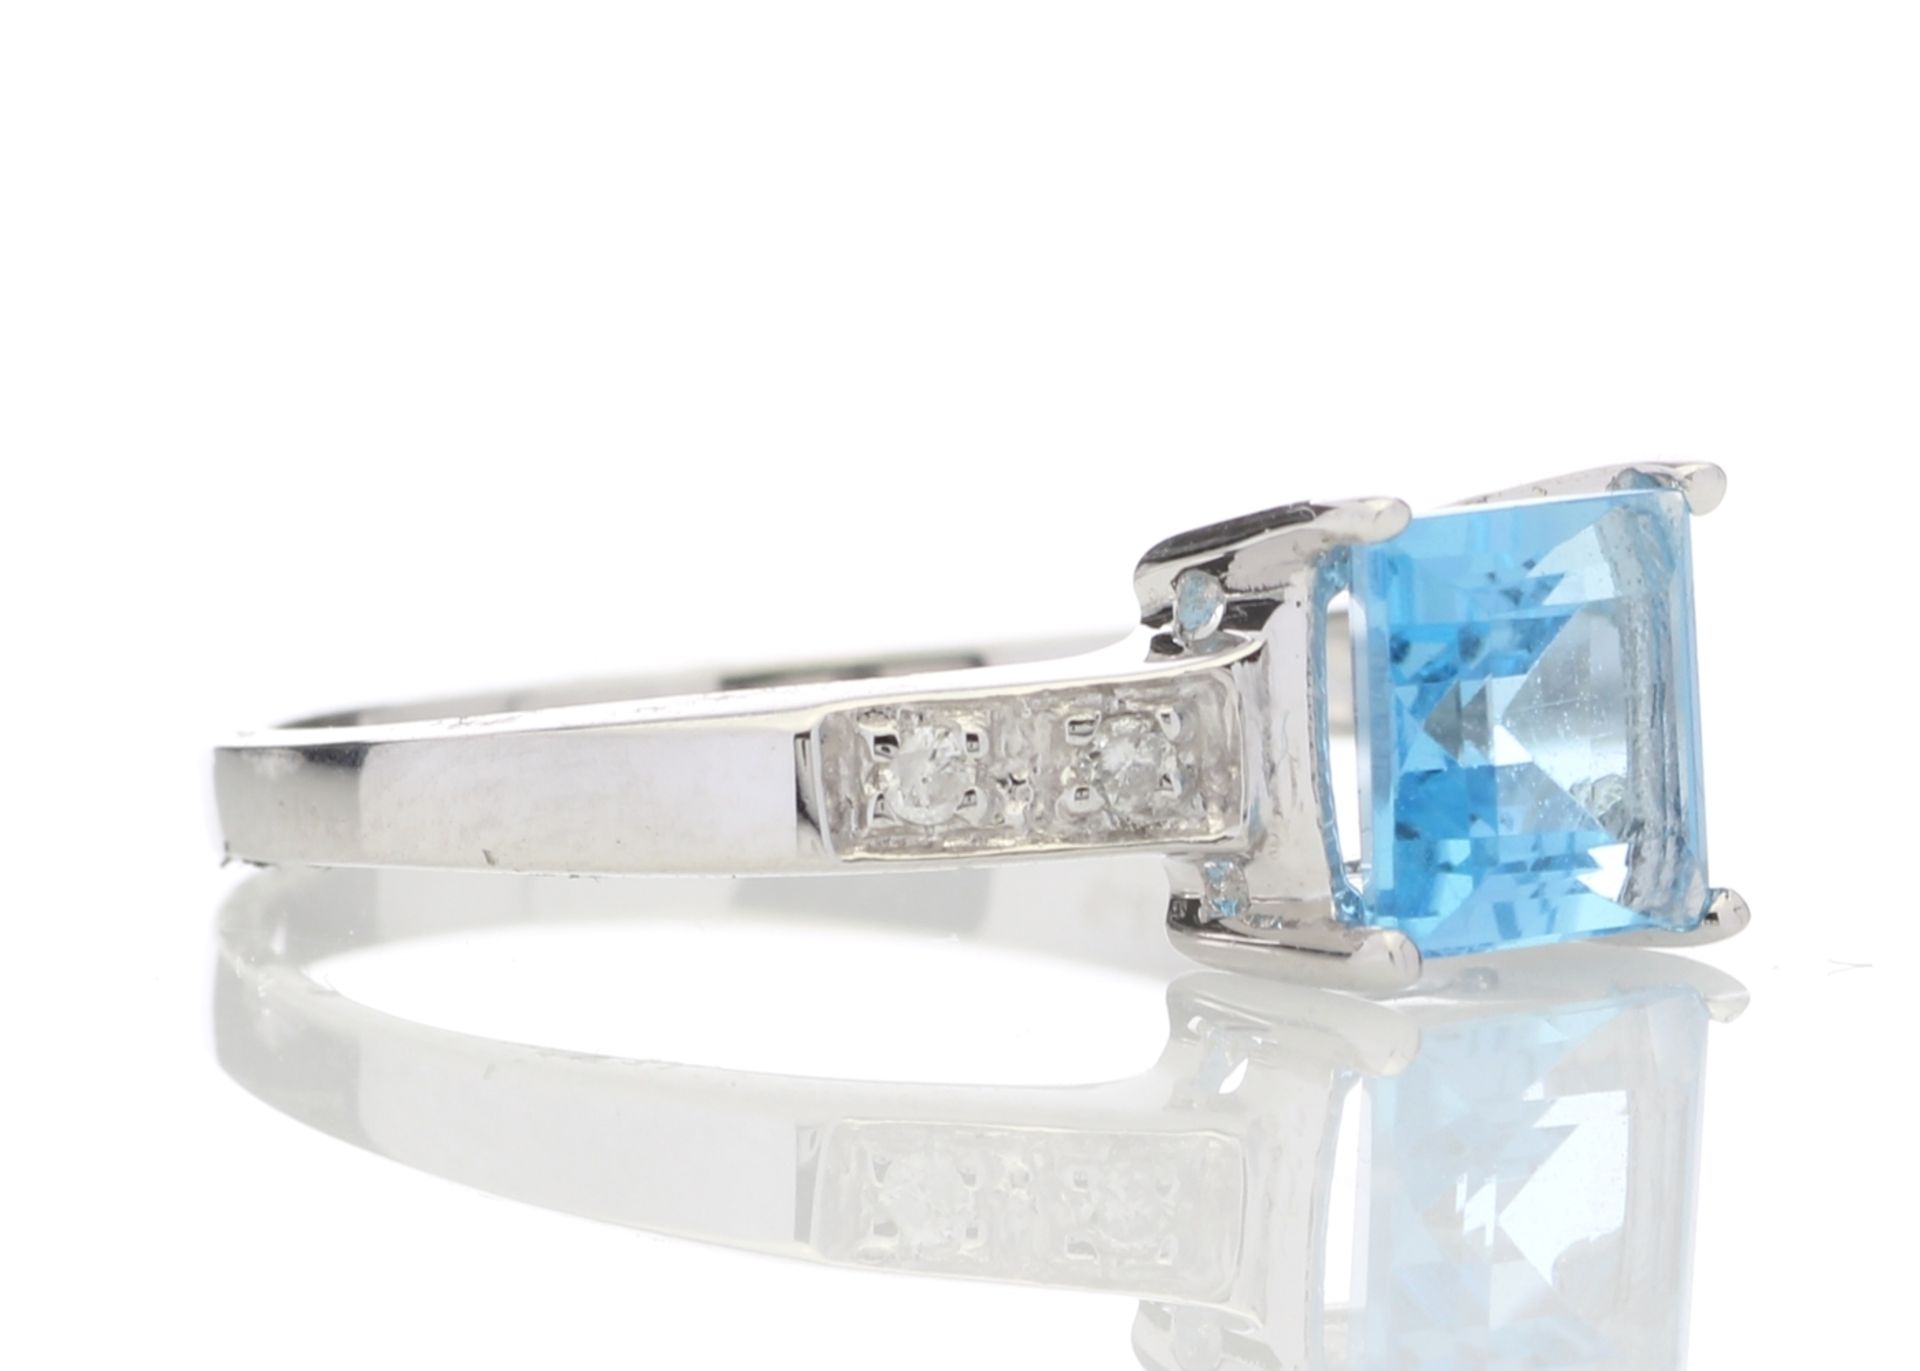 9ct White Gold Diamond And Blue Topaz Ring 0.04 Carats - Valued by GIE £1,170.00 - 9ct White Gold - Image 4 of 5